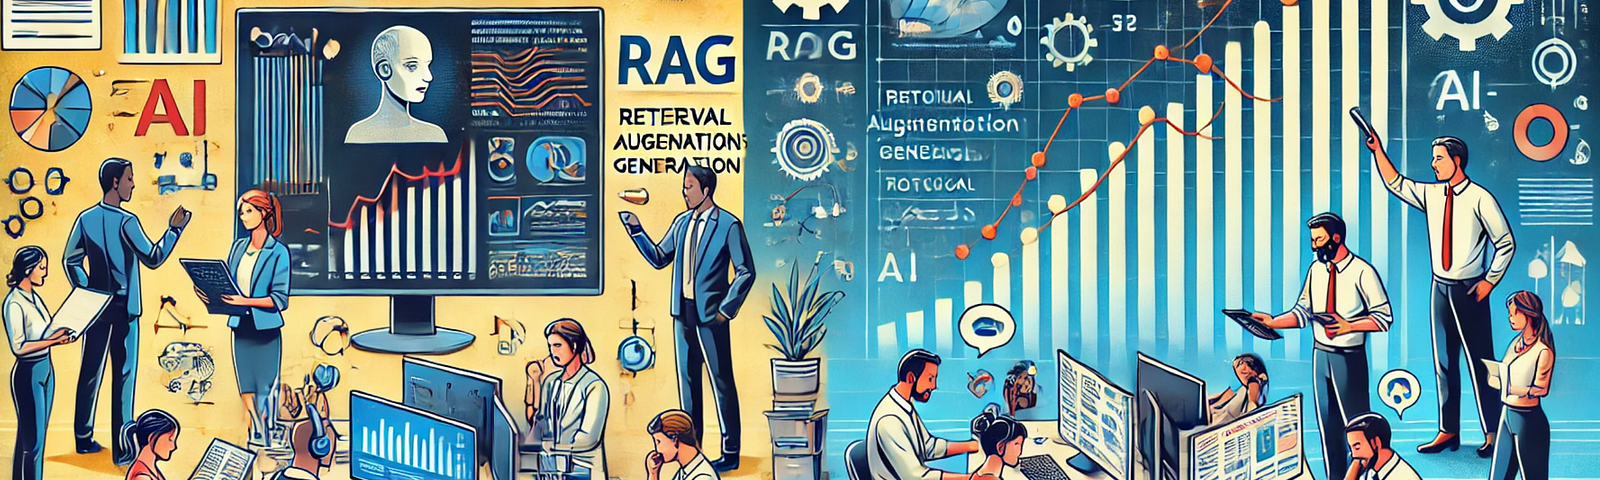 “Illustration showing two contrasting workplace scenes. On the left, a modern workplace where professionals use an AI-powered assistant on their devices for tasks such as checking protocols, torque specifications, and troubleshooting. On the right, a struggling workplace with employees flipping through paper manuals and making phone calls, appearing stressed. In the center top, a graph displays three lines: an exponential growth line for AI technology, a linear growth line for companies adopting